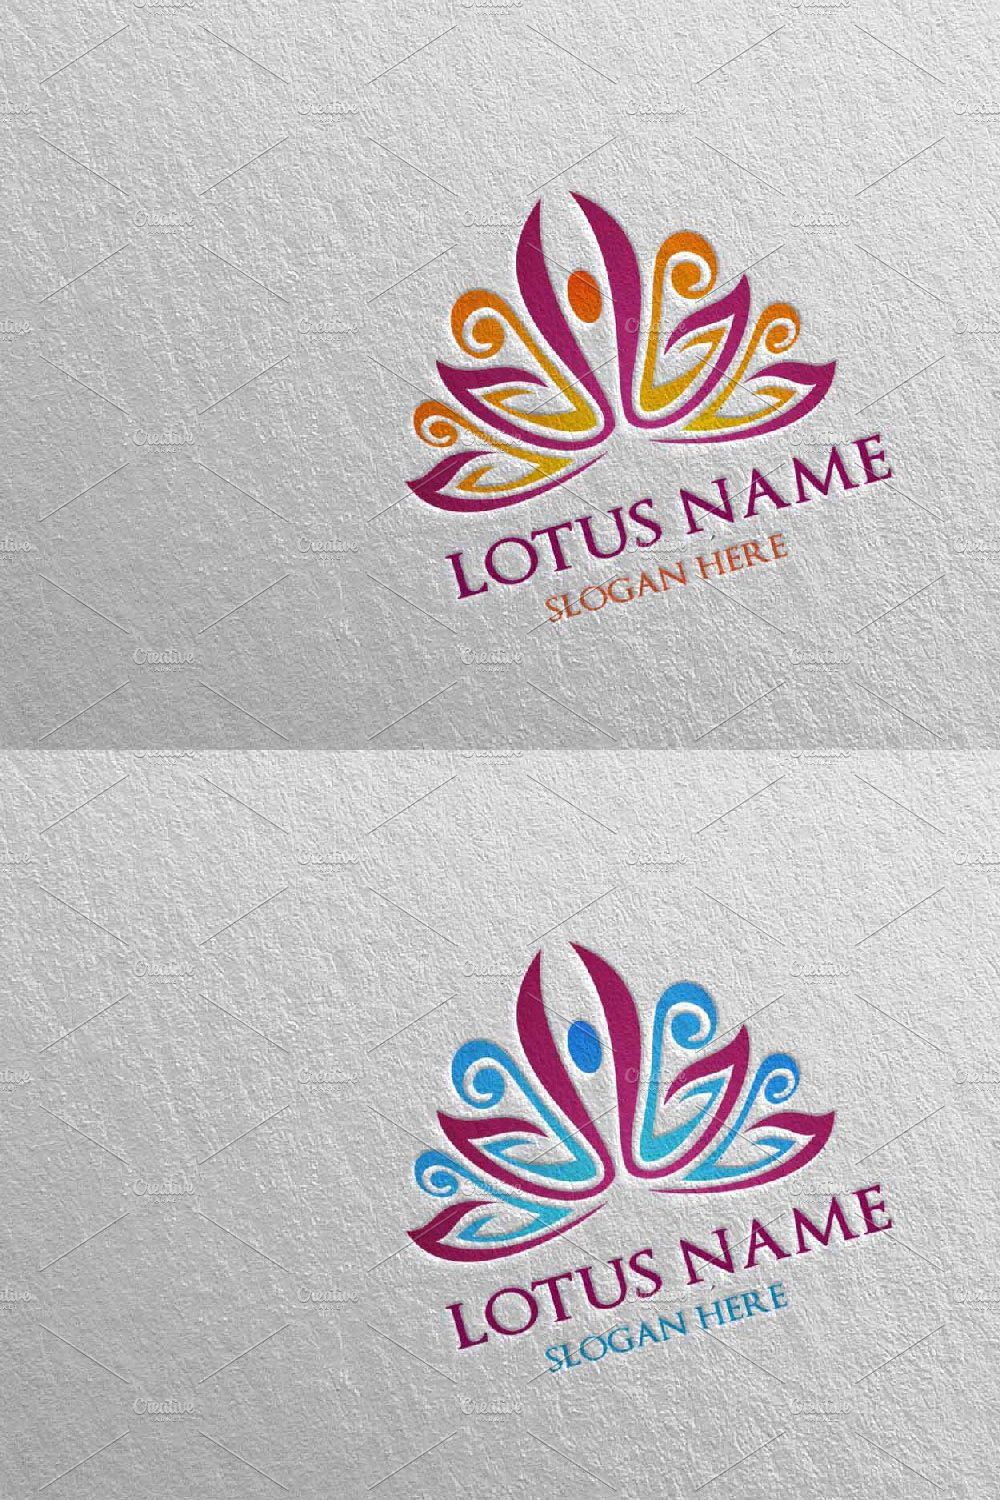 Yoga and Spa Lotus Flower logo 14 pinterest preview image.